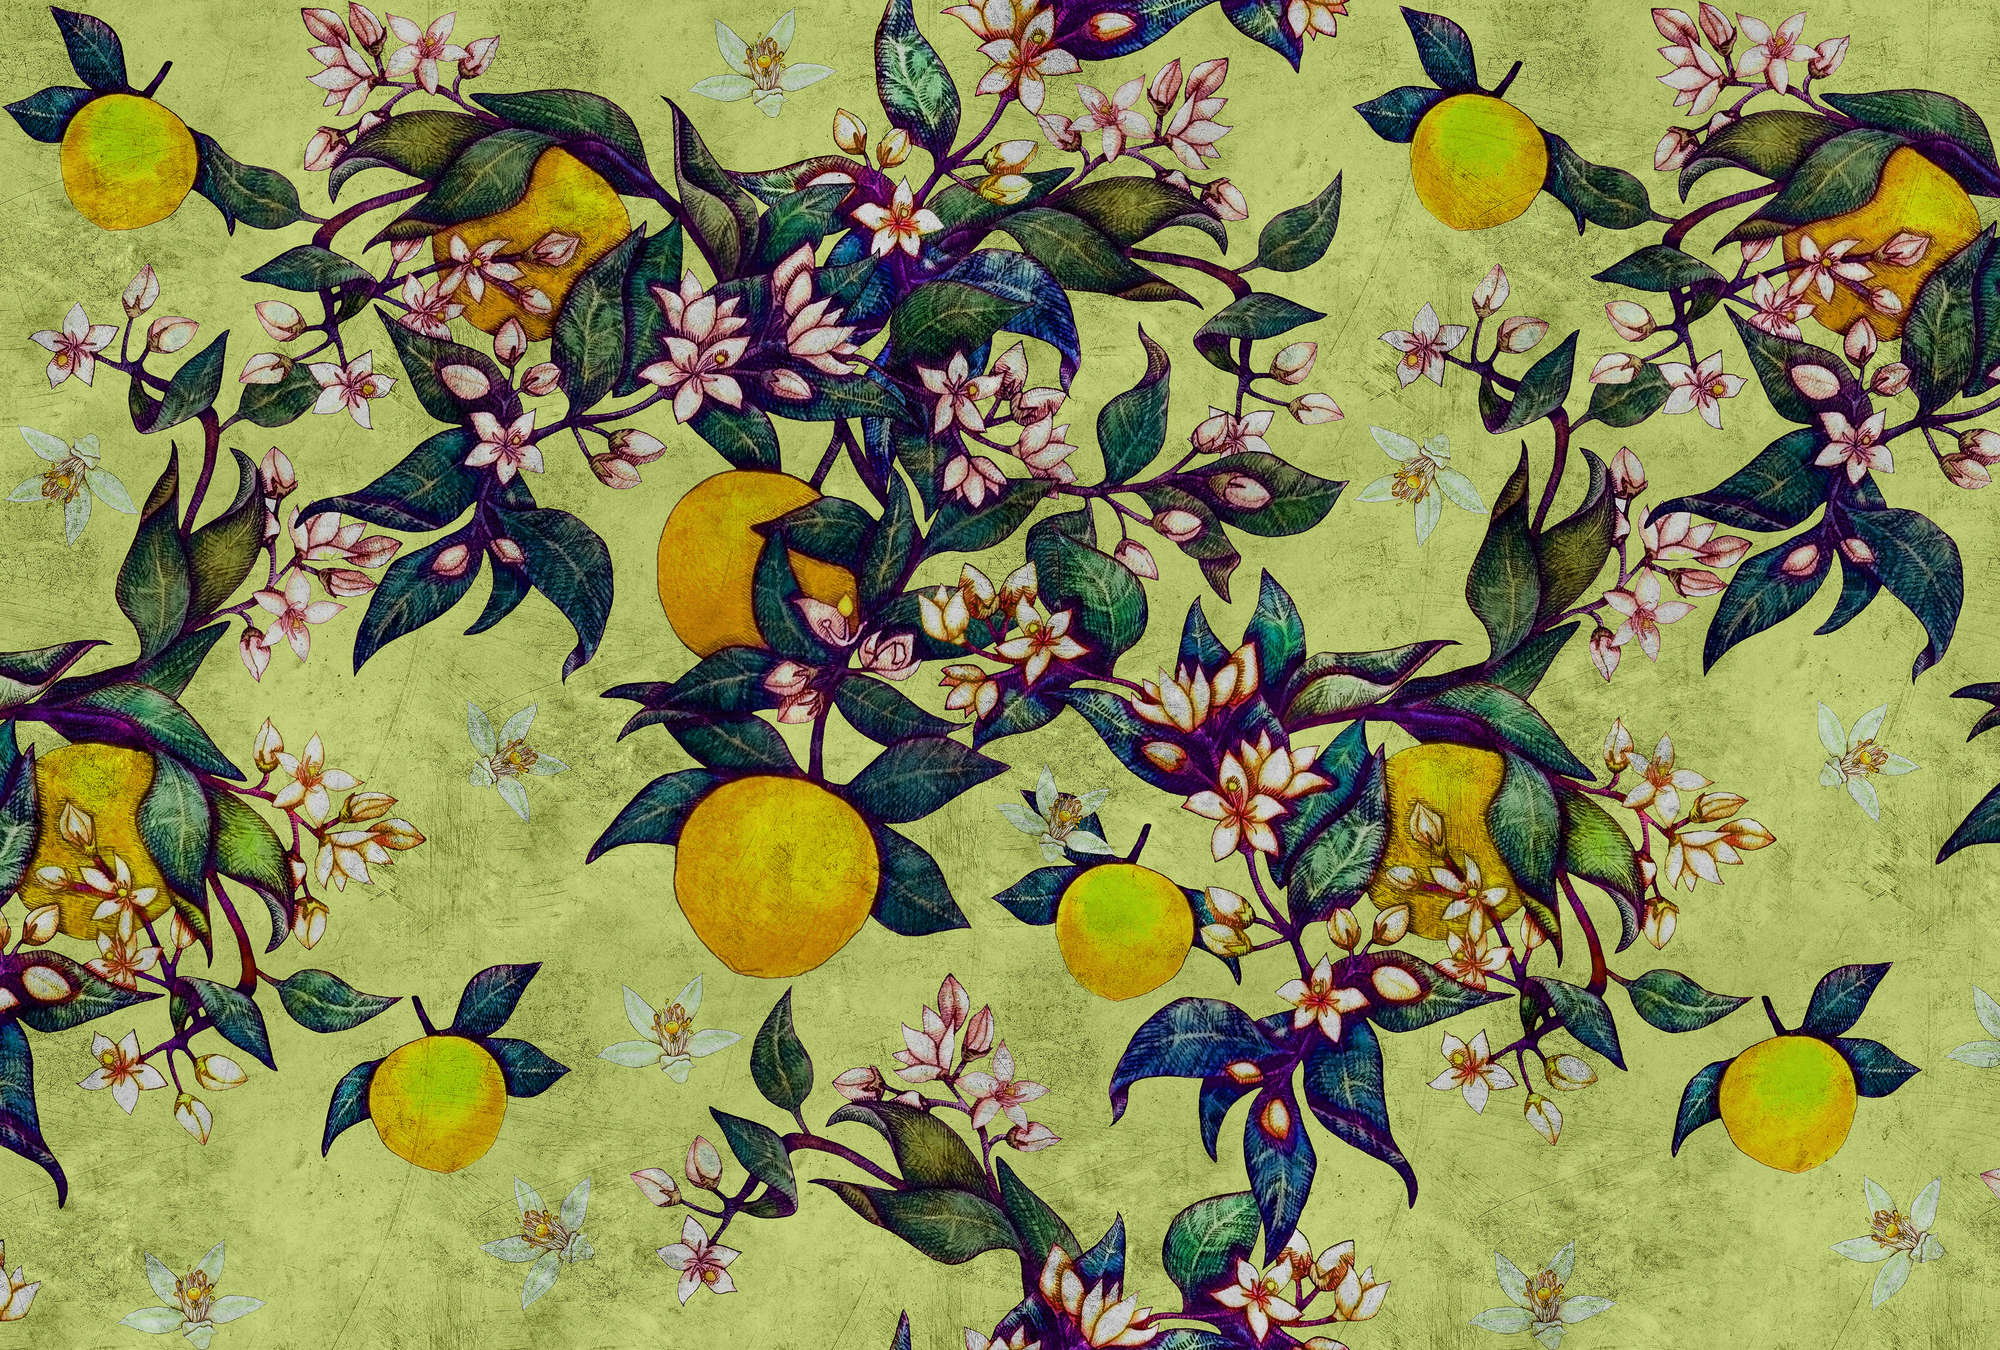             Grapefruit Tree 1 - Scratch Textured Wallpaper with Citrus & Floral Pattern - Yellow, Green | Premium Smooth Non-woven
        